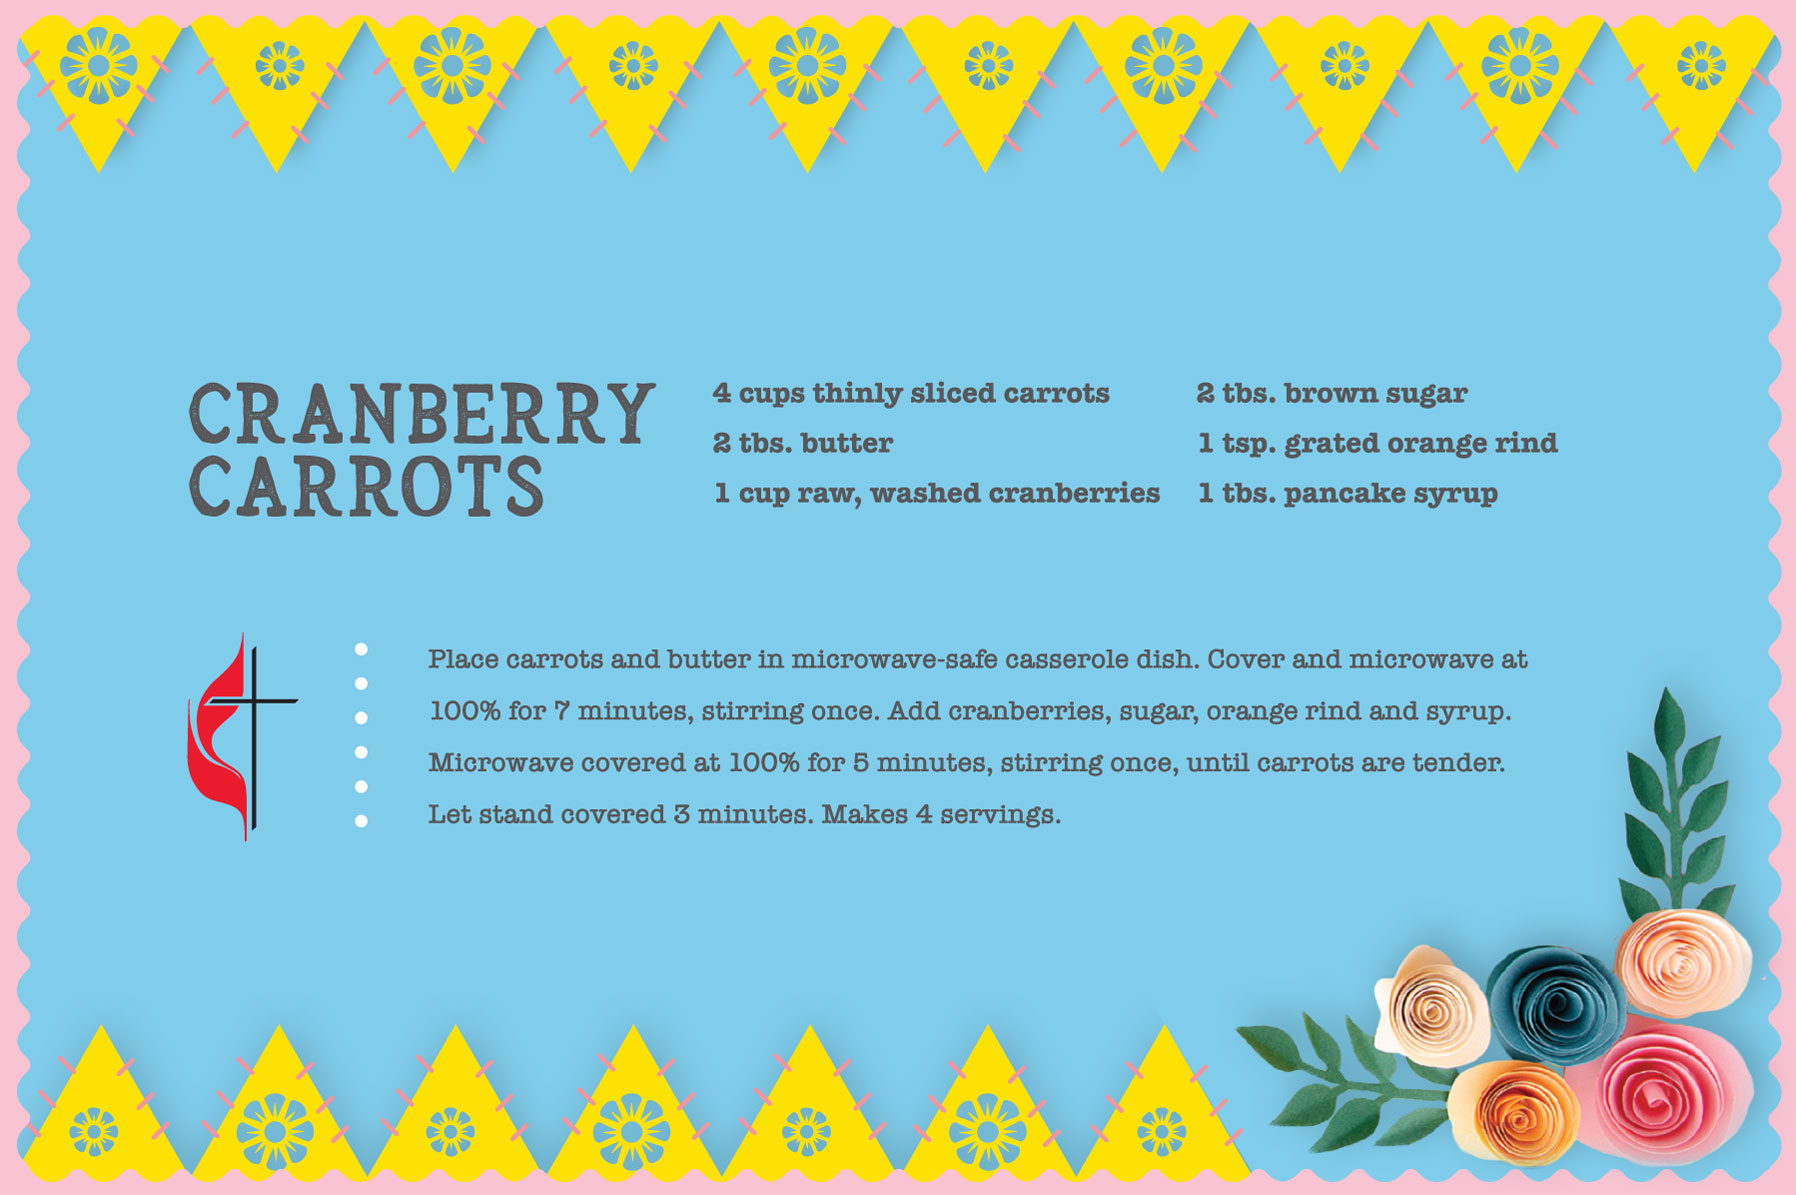 Cranberry and carrots recipe for Easter. Design by Sara Schork for United Methodist Communications